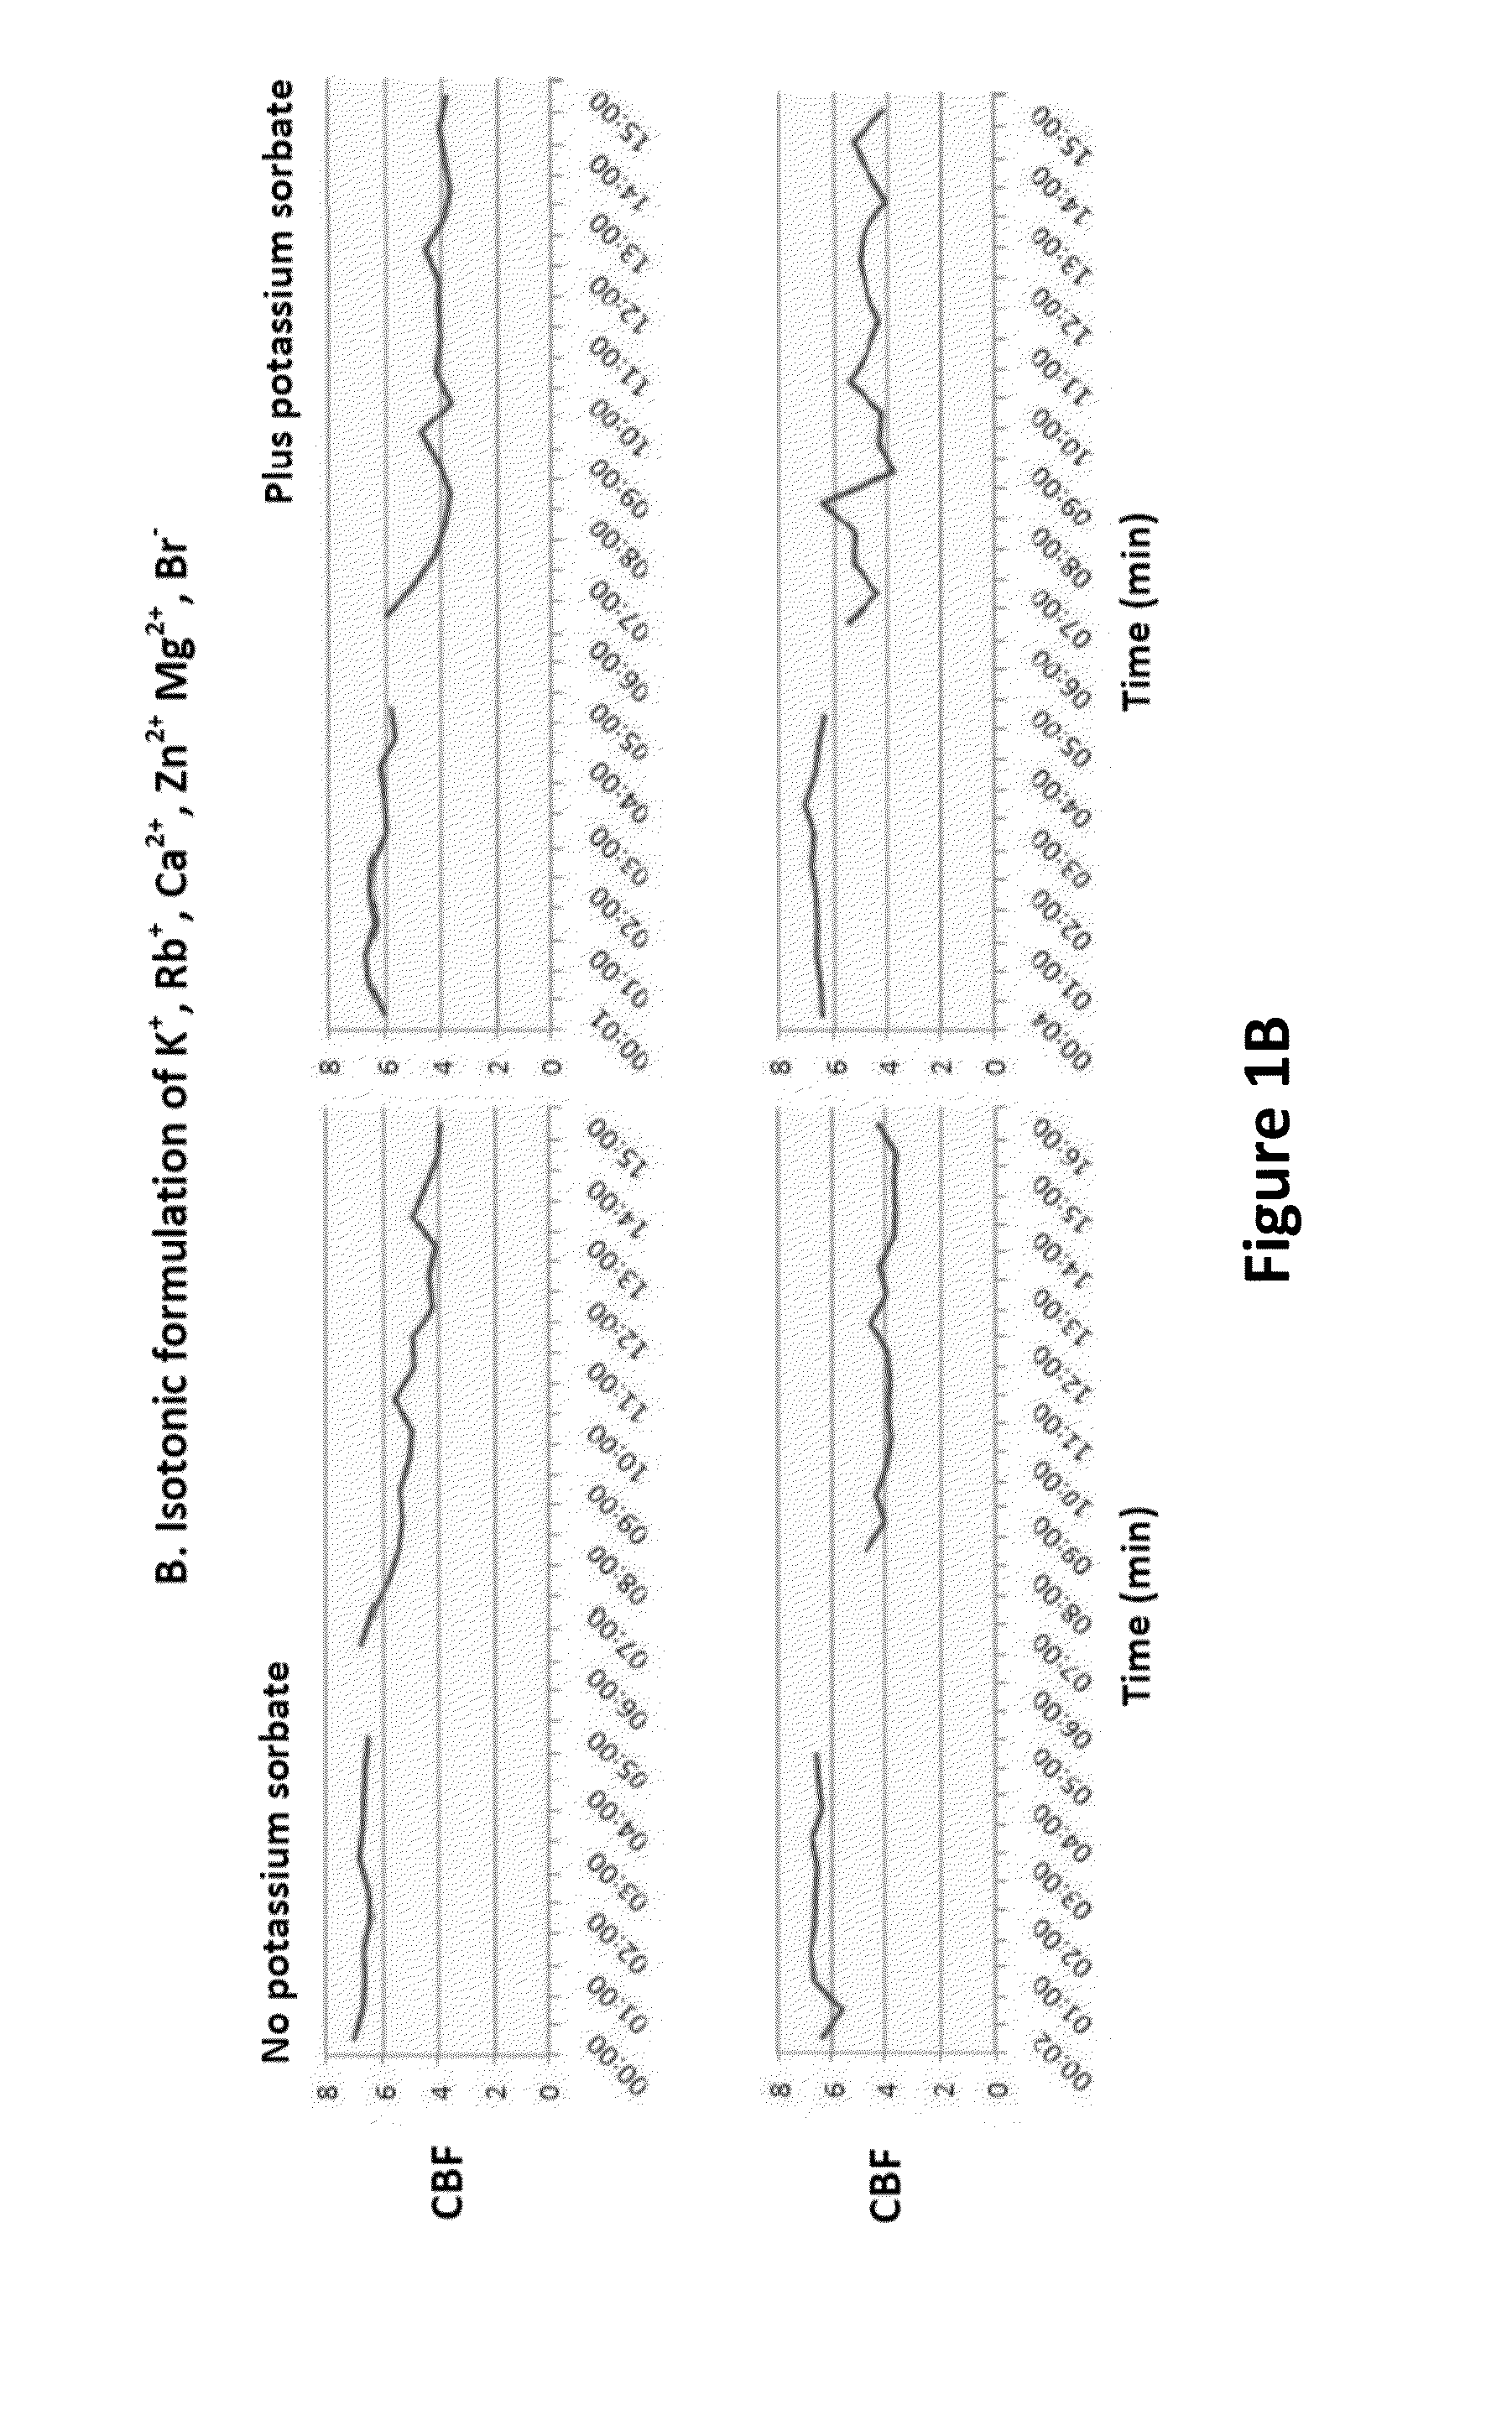 Methods of enhancing wound healing using magnesium and bromide